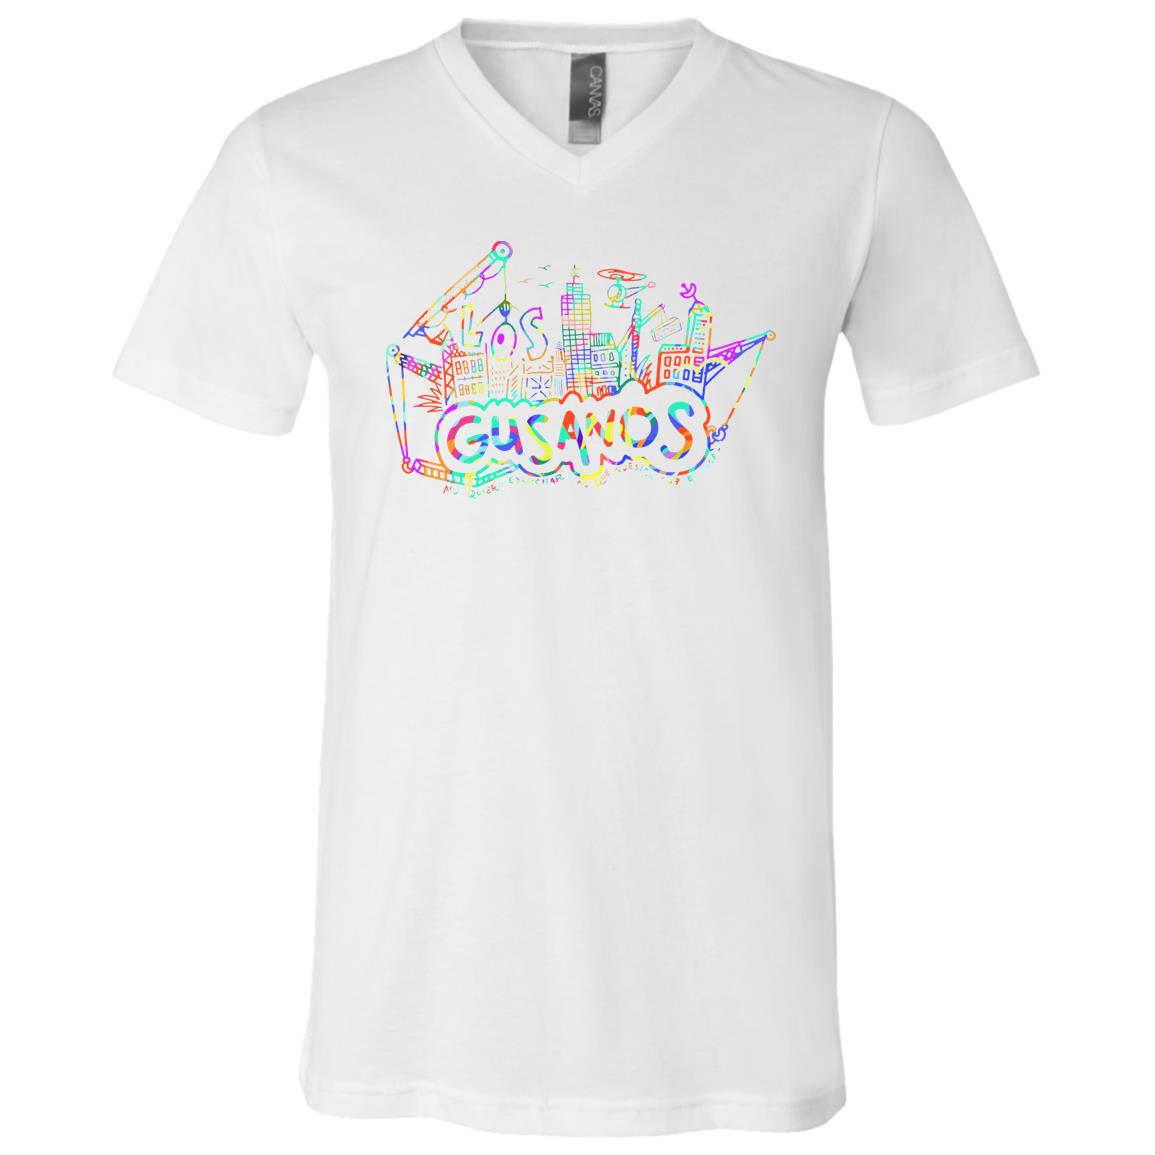 Unisex Jersey SS V-Neck T-Shirt, DownTown - LOS GUSANOS